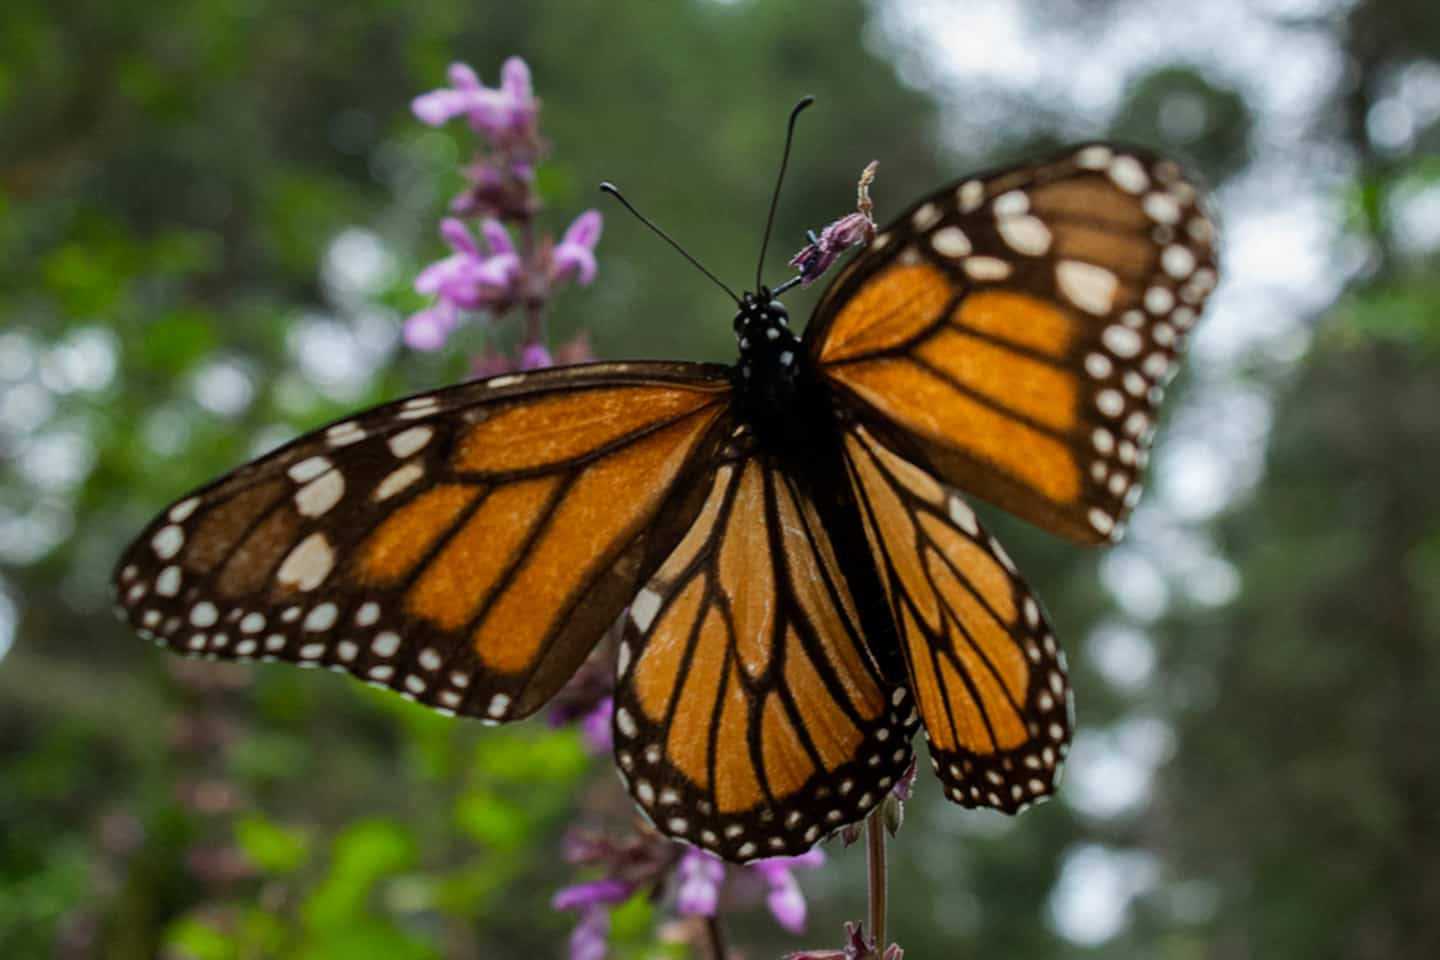 The migratory Monarch on the endangered species list